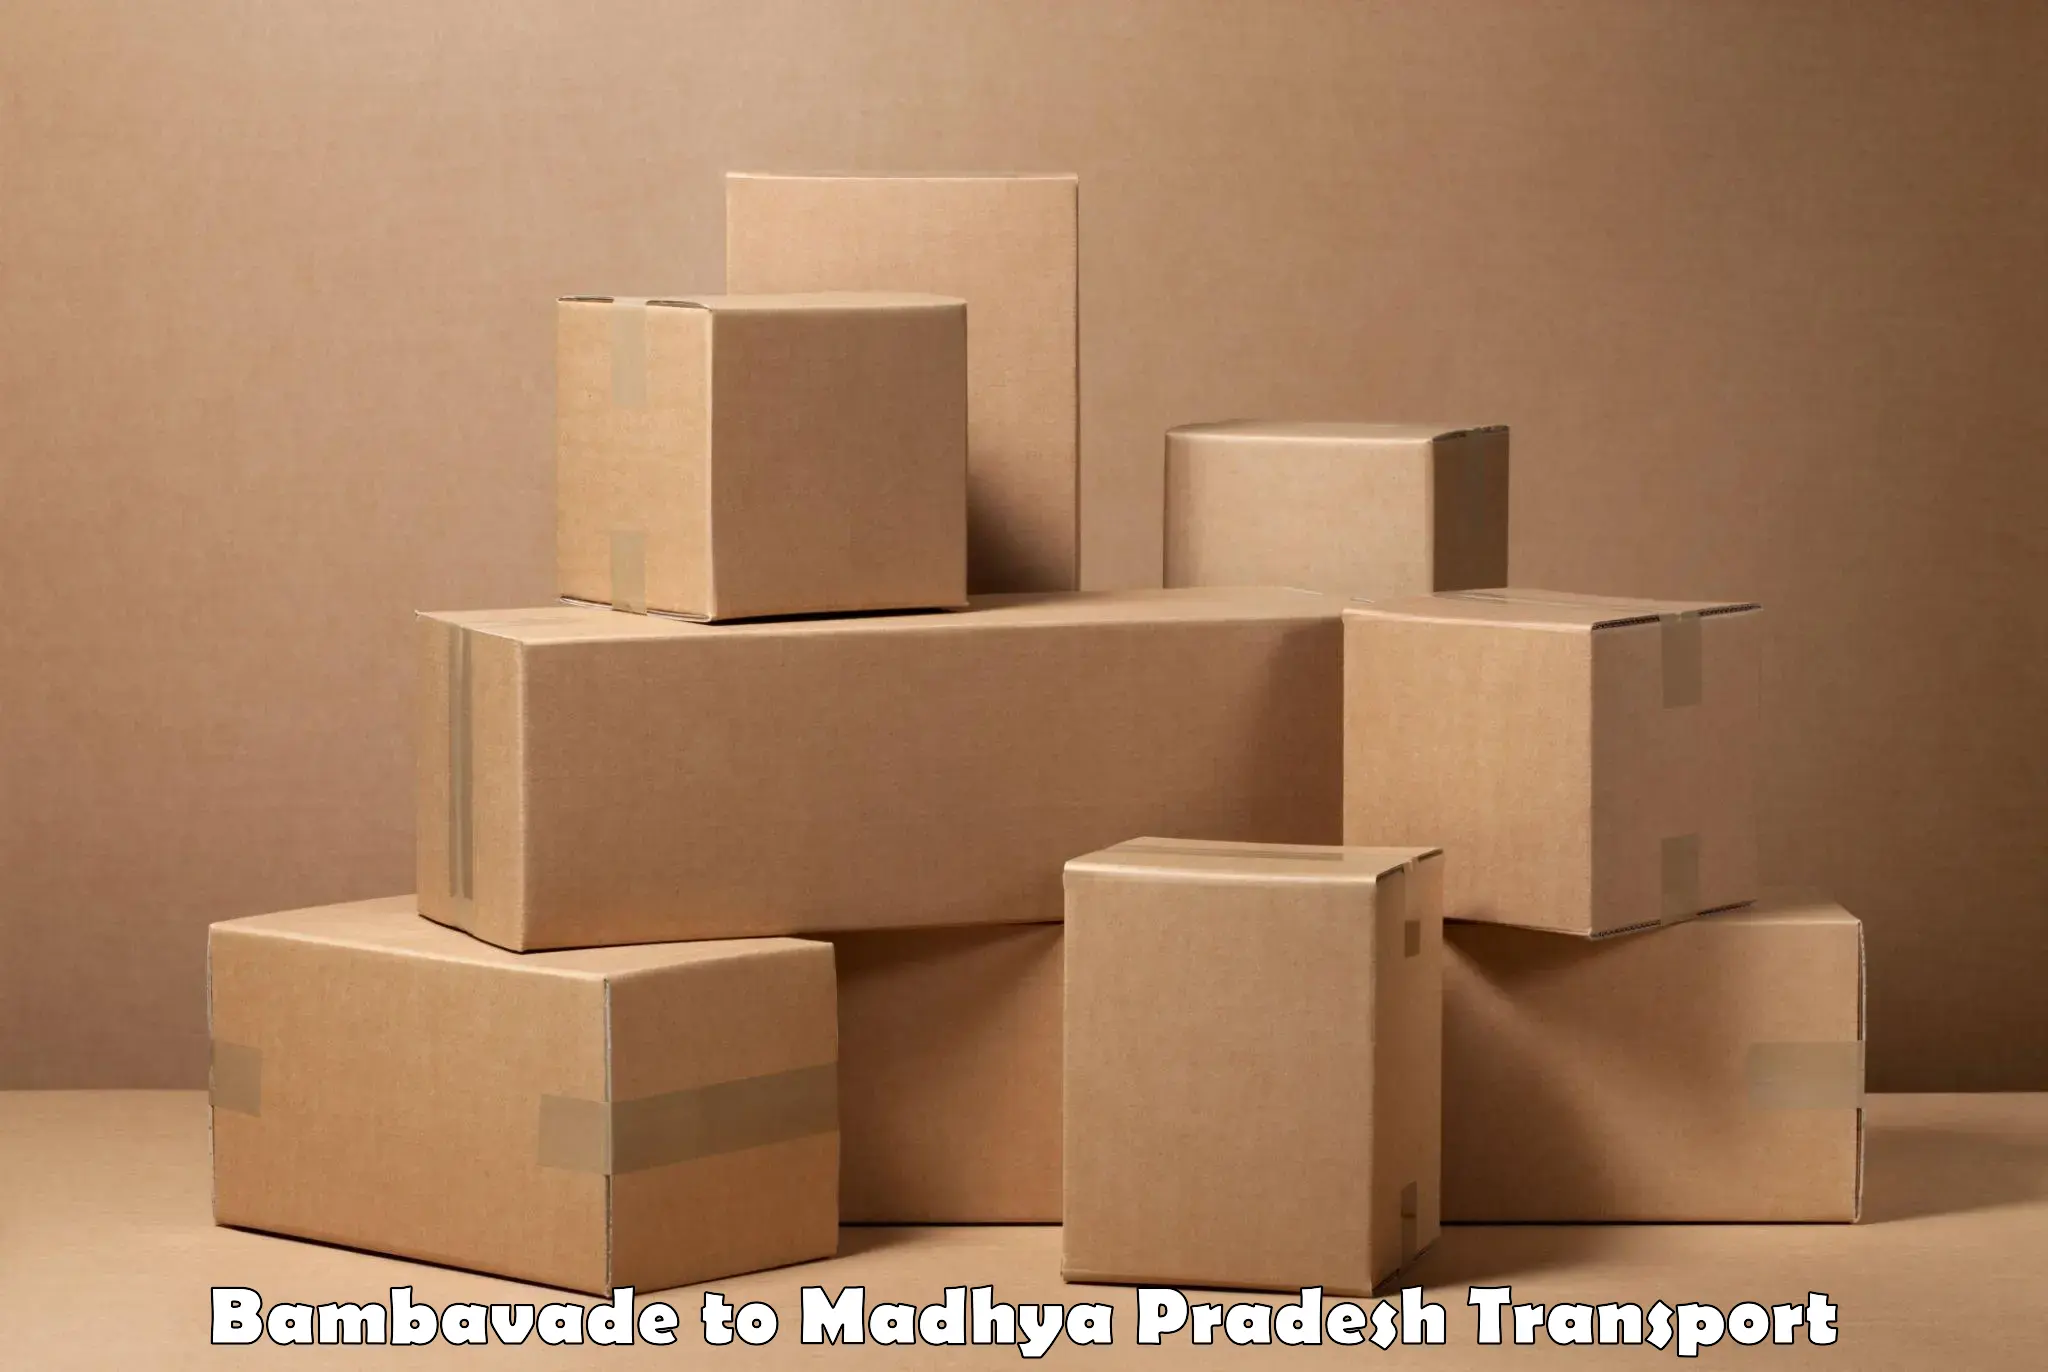 Express transport services Bambavade to BHEL Bhopal